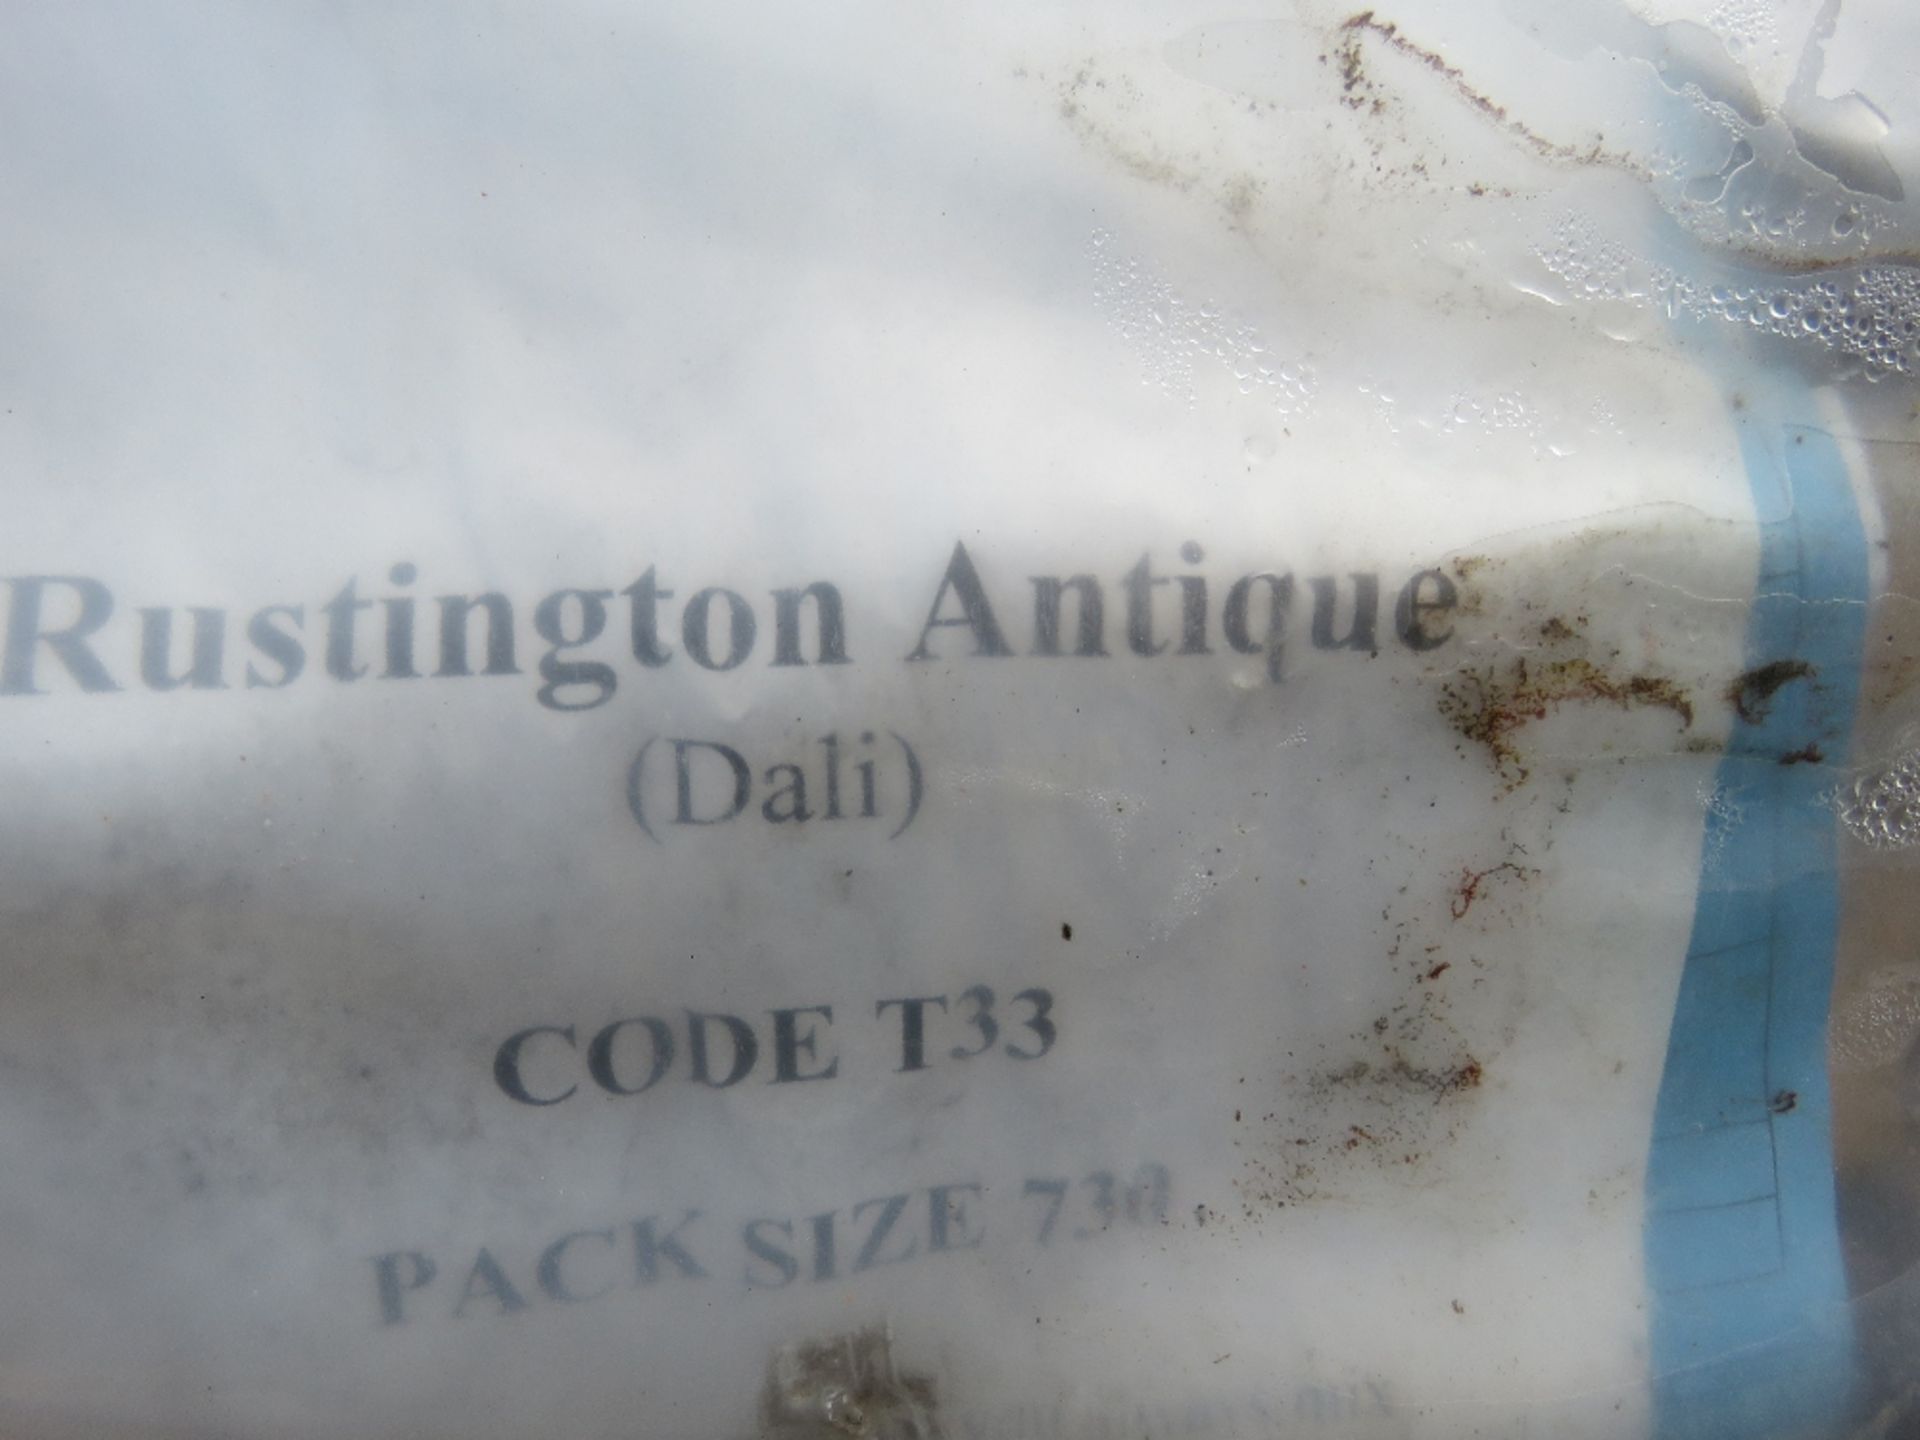 3 X PACKS OF RUSHINGTON ANTIQUE (DALI) BRICKS, CODE T33. BELIEVED TO BE 730NO IN EACH PACK. THIS - Image 5 of 17